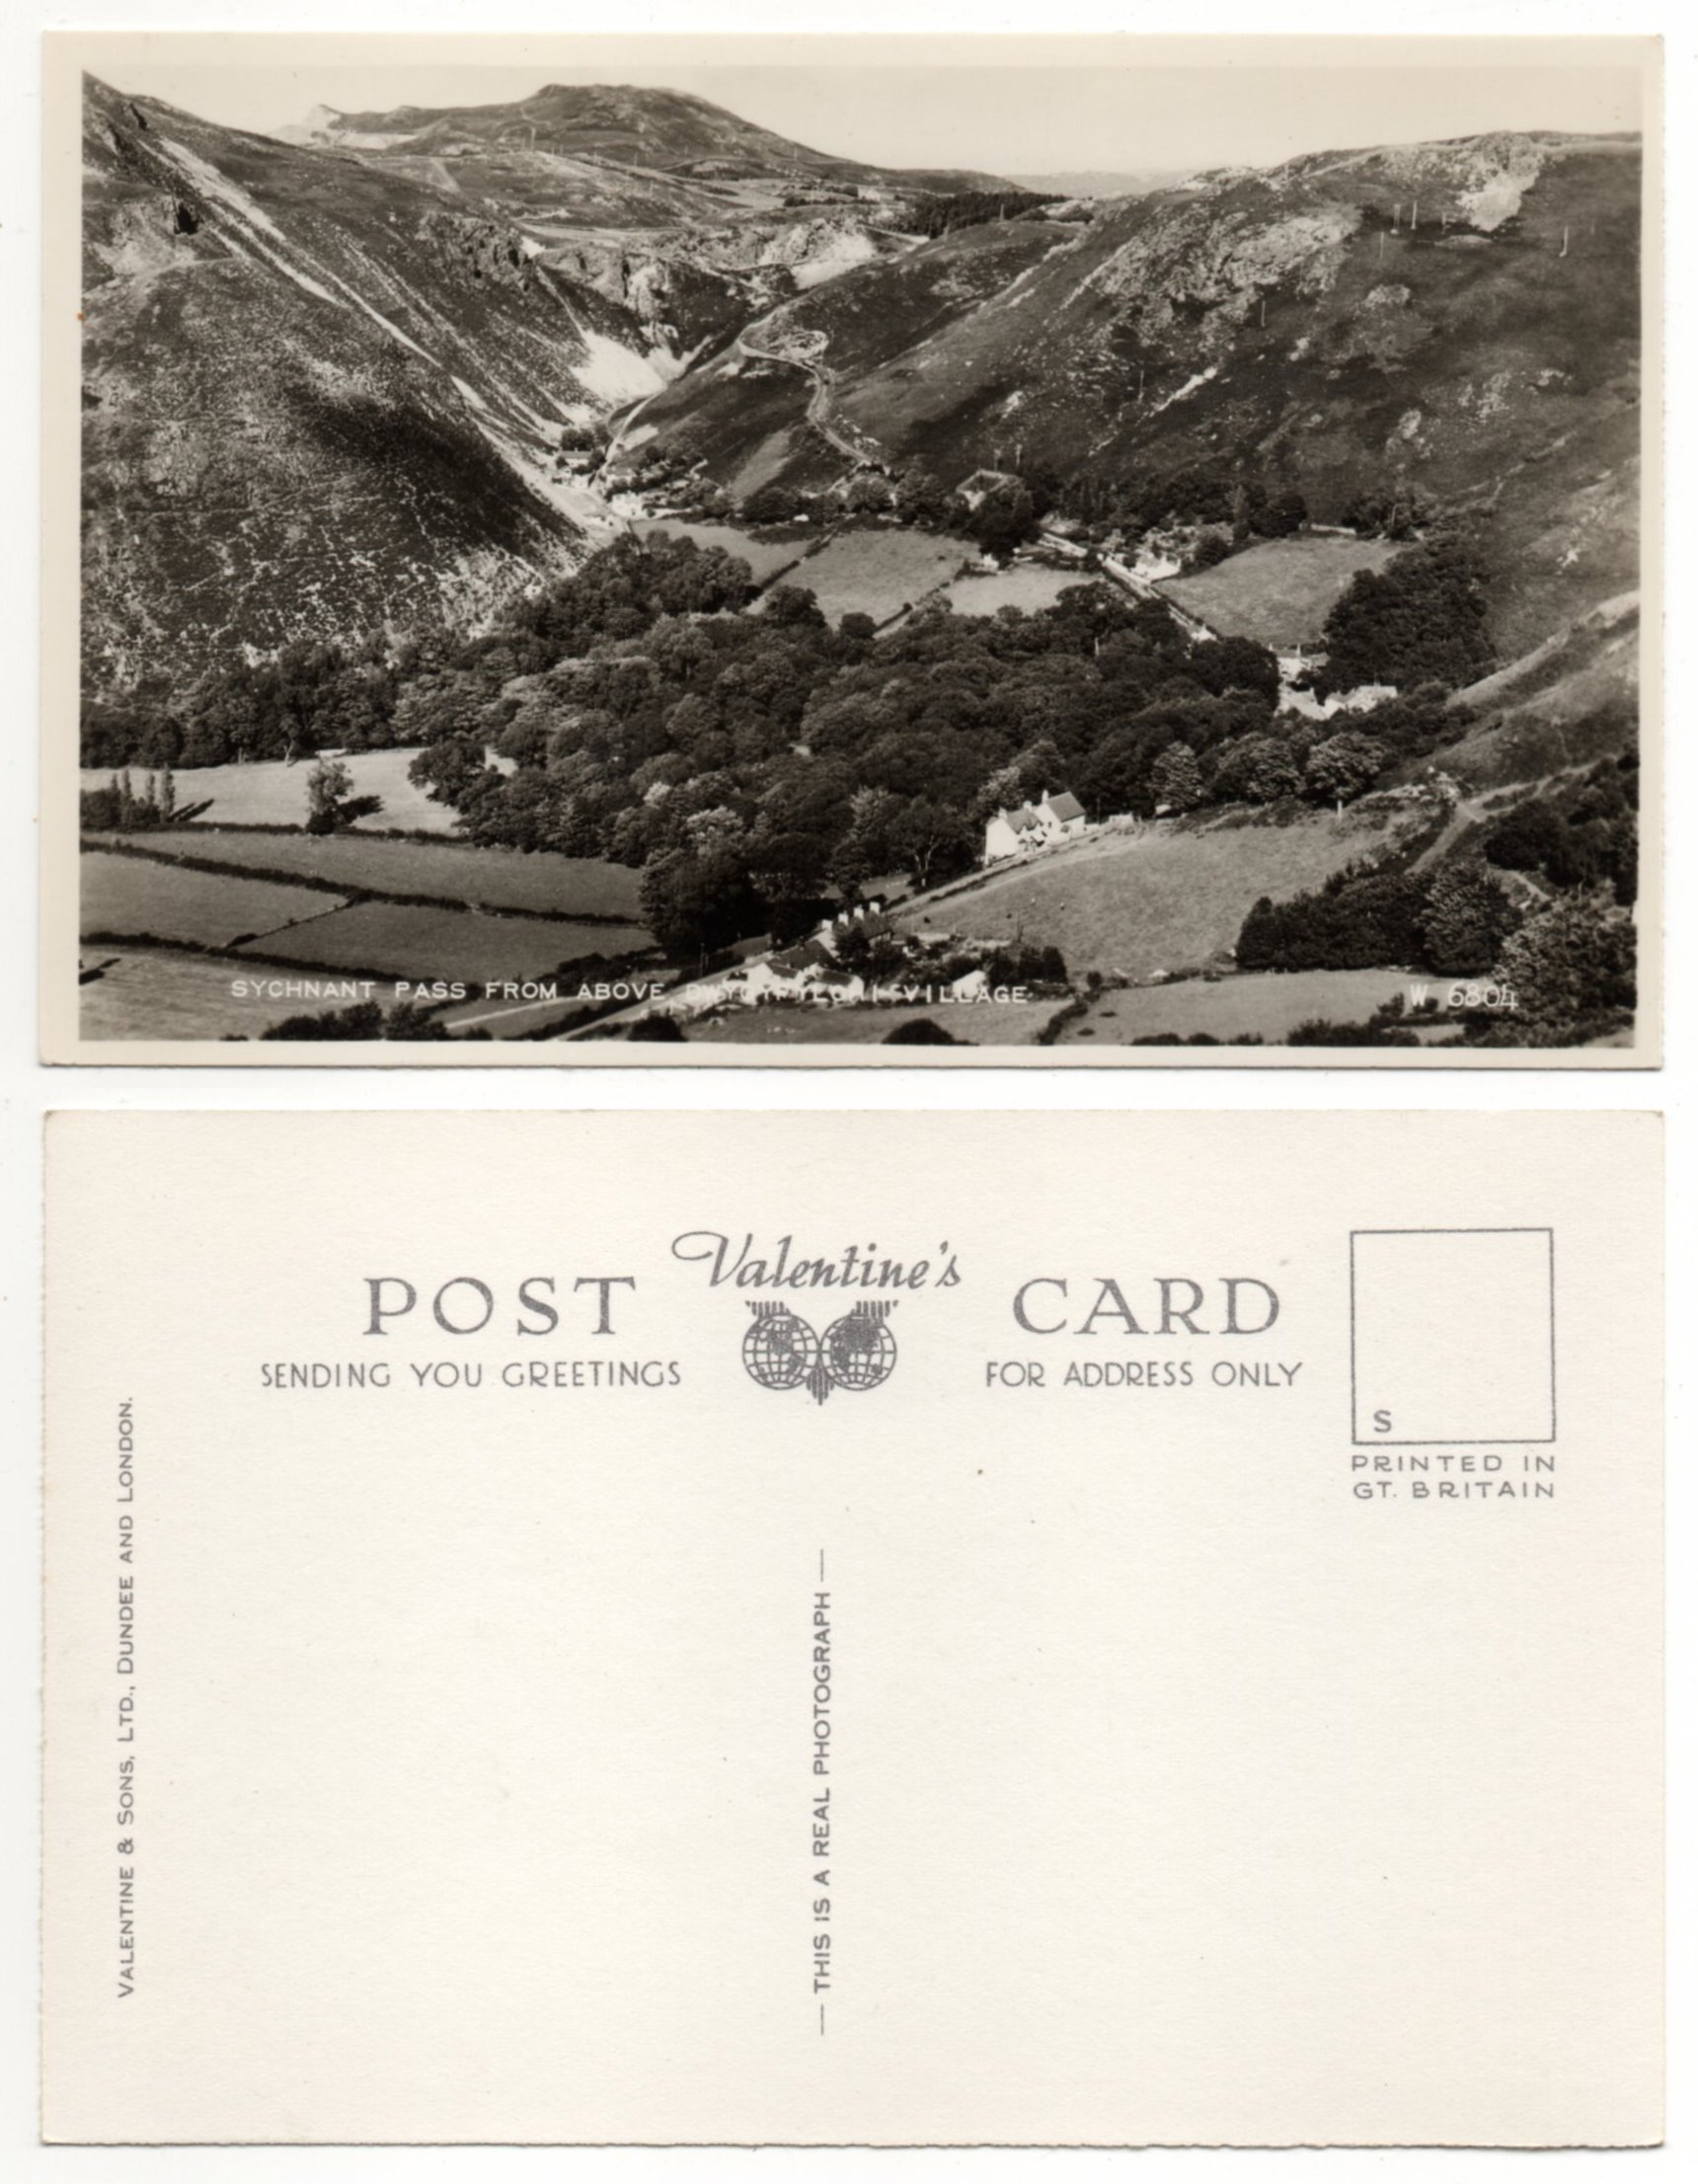 Sychnant Pass From Above Dwygyfylchi Village PW0784.jpg  by whitetaylor